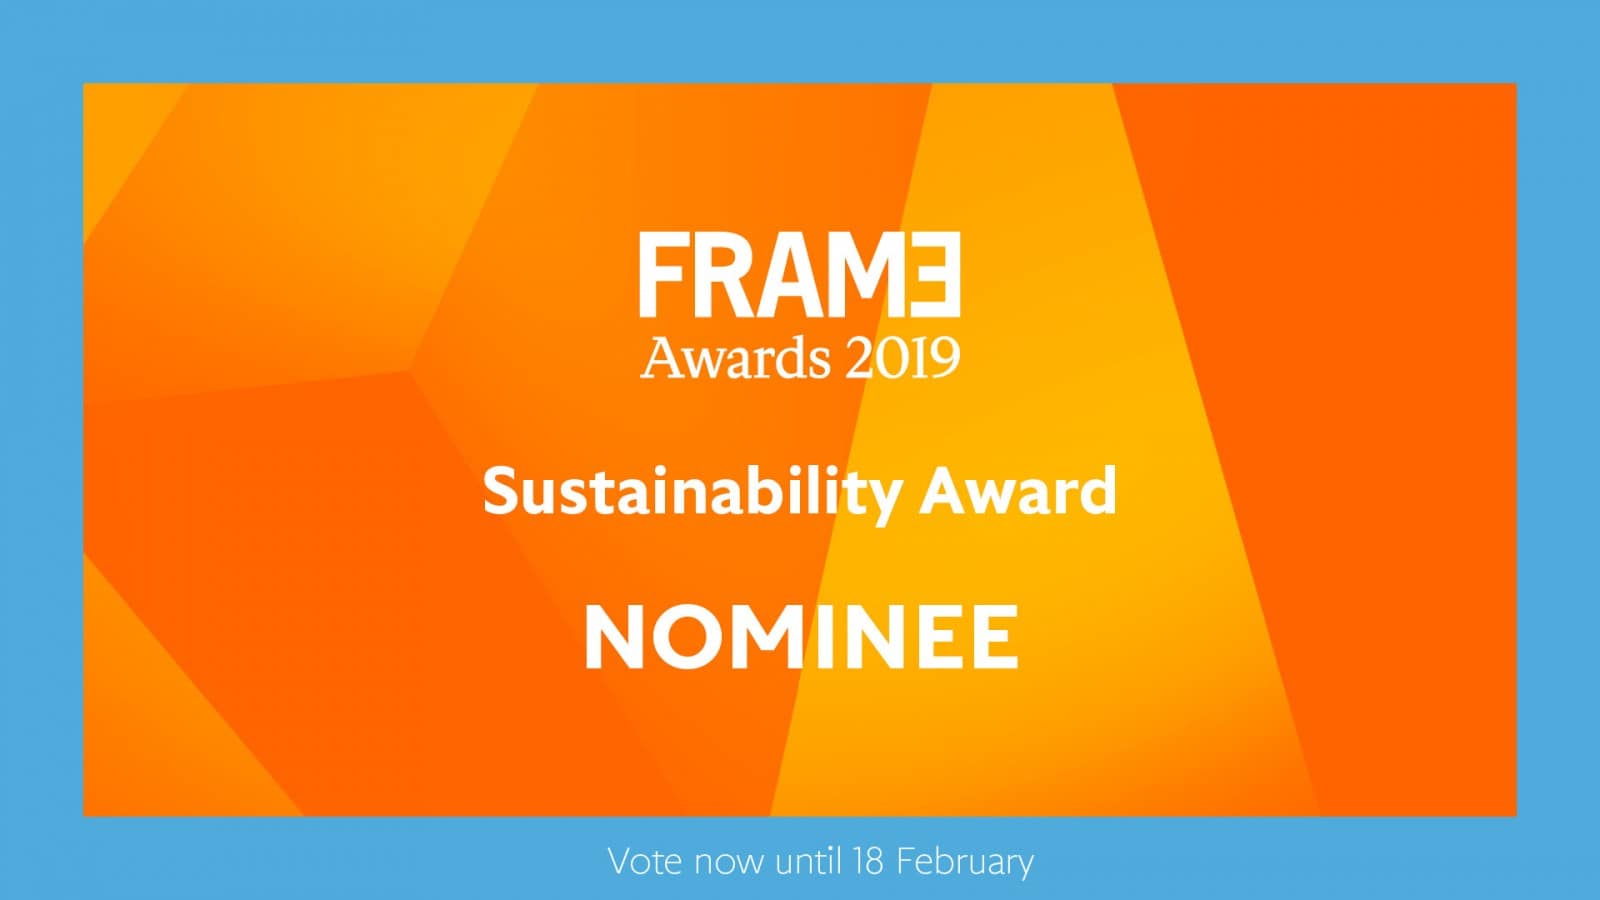 Containerwerk shortlisted for Frame Awards 2019